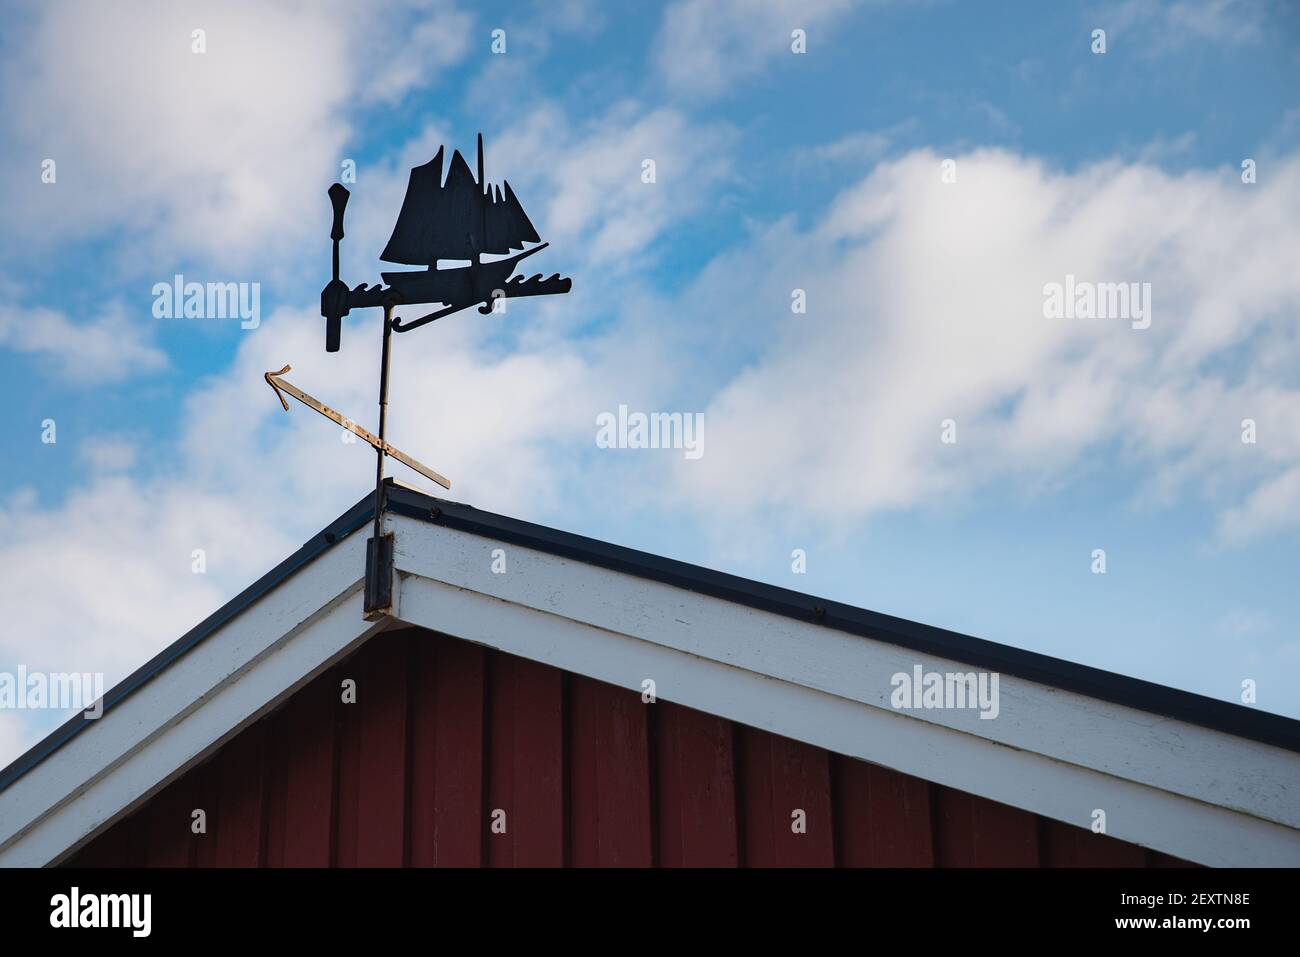 Metallic weather vane on a pitched roof resembles an ancient Viking sailing ship or galley indicating the wind direction. Ancient sailboat wind vane Stock Photo